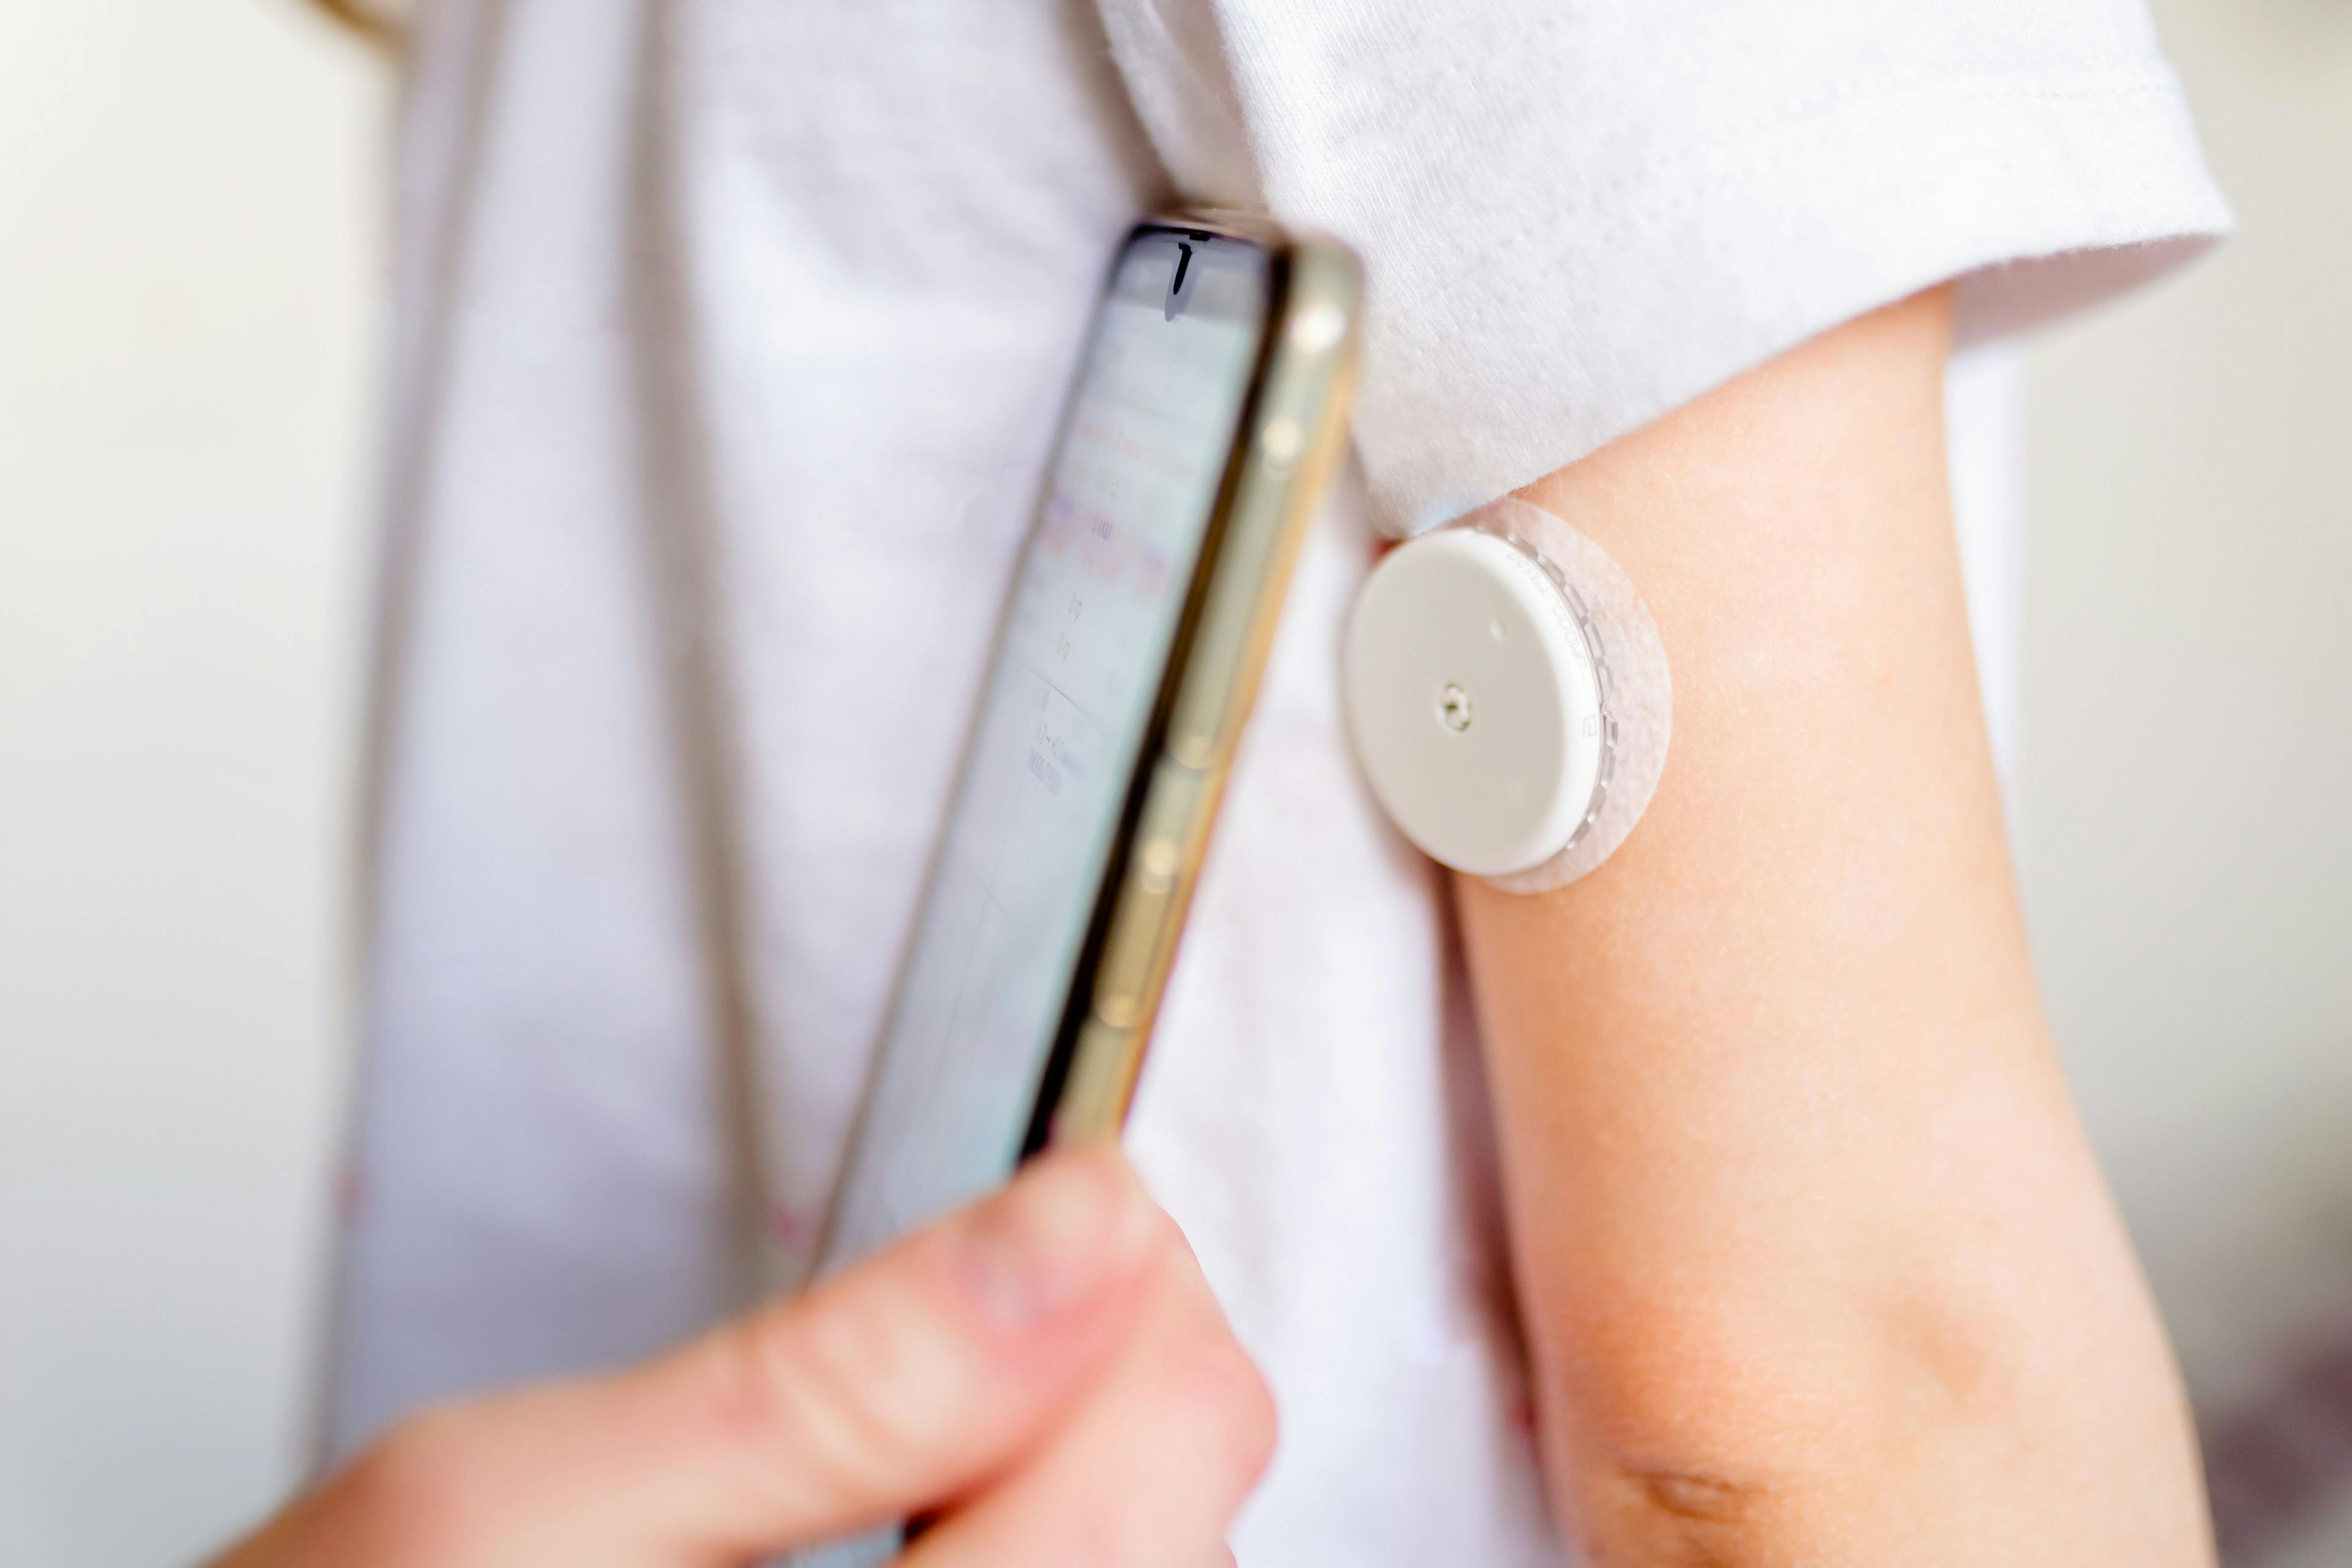 CGM Technology Bridges the Gap in Type 2 Diabetes Care for Underserved Patients